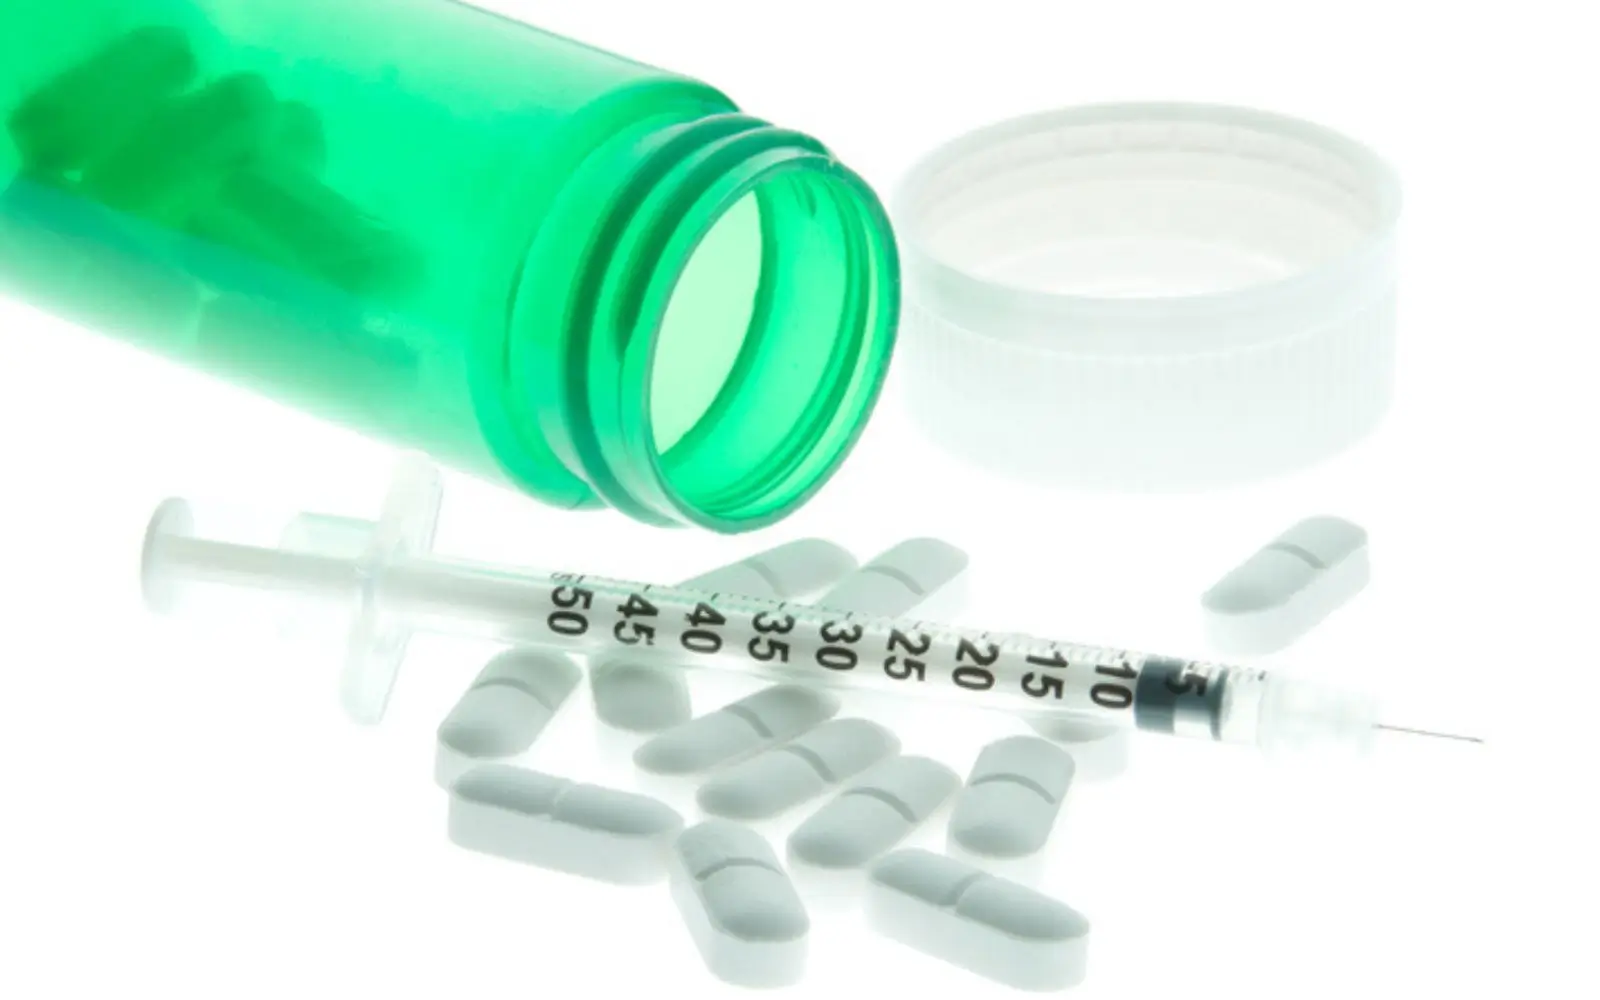 Medical testing supplies including a syringe, white pills, and a green glass bottle, symbolizing the precision and care in hair drug testing processes.